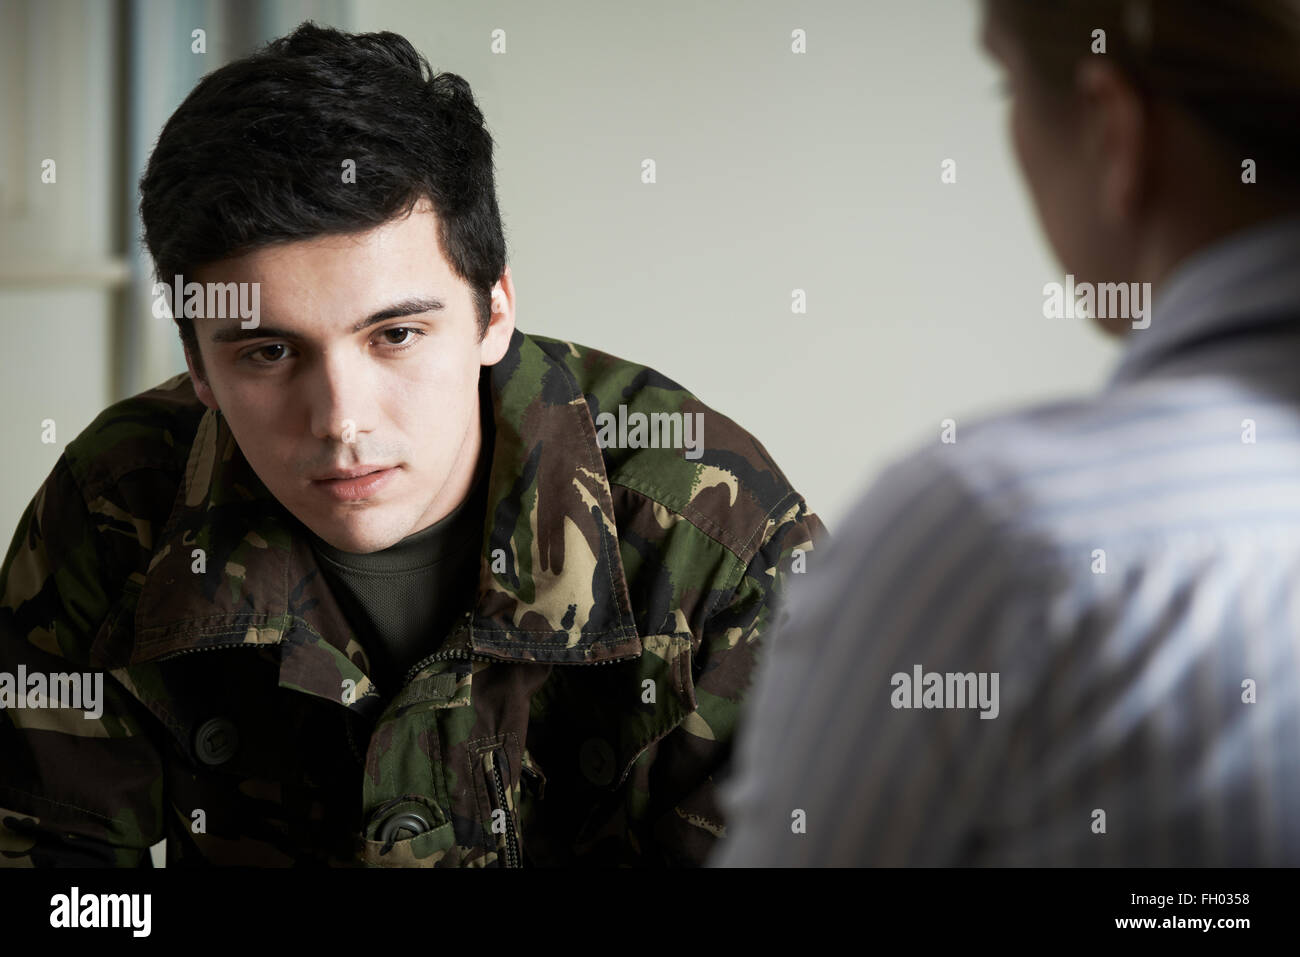 Soldier Suffering With Stress Talking To Counselor Stock Photo